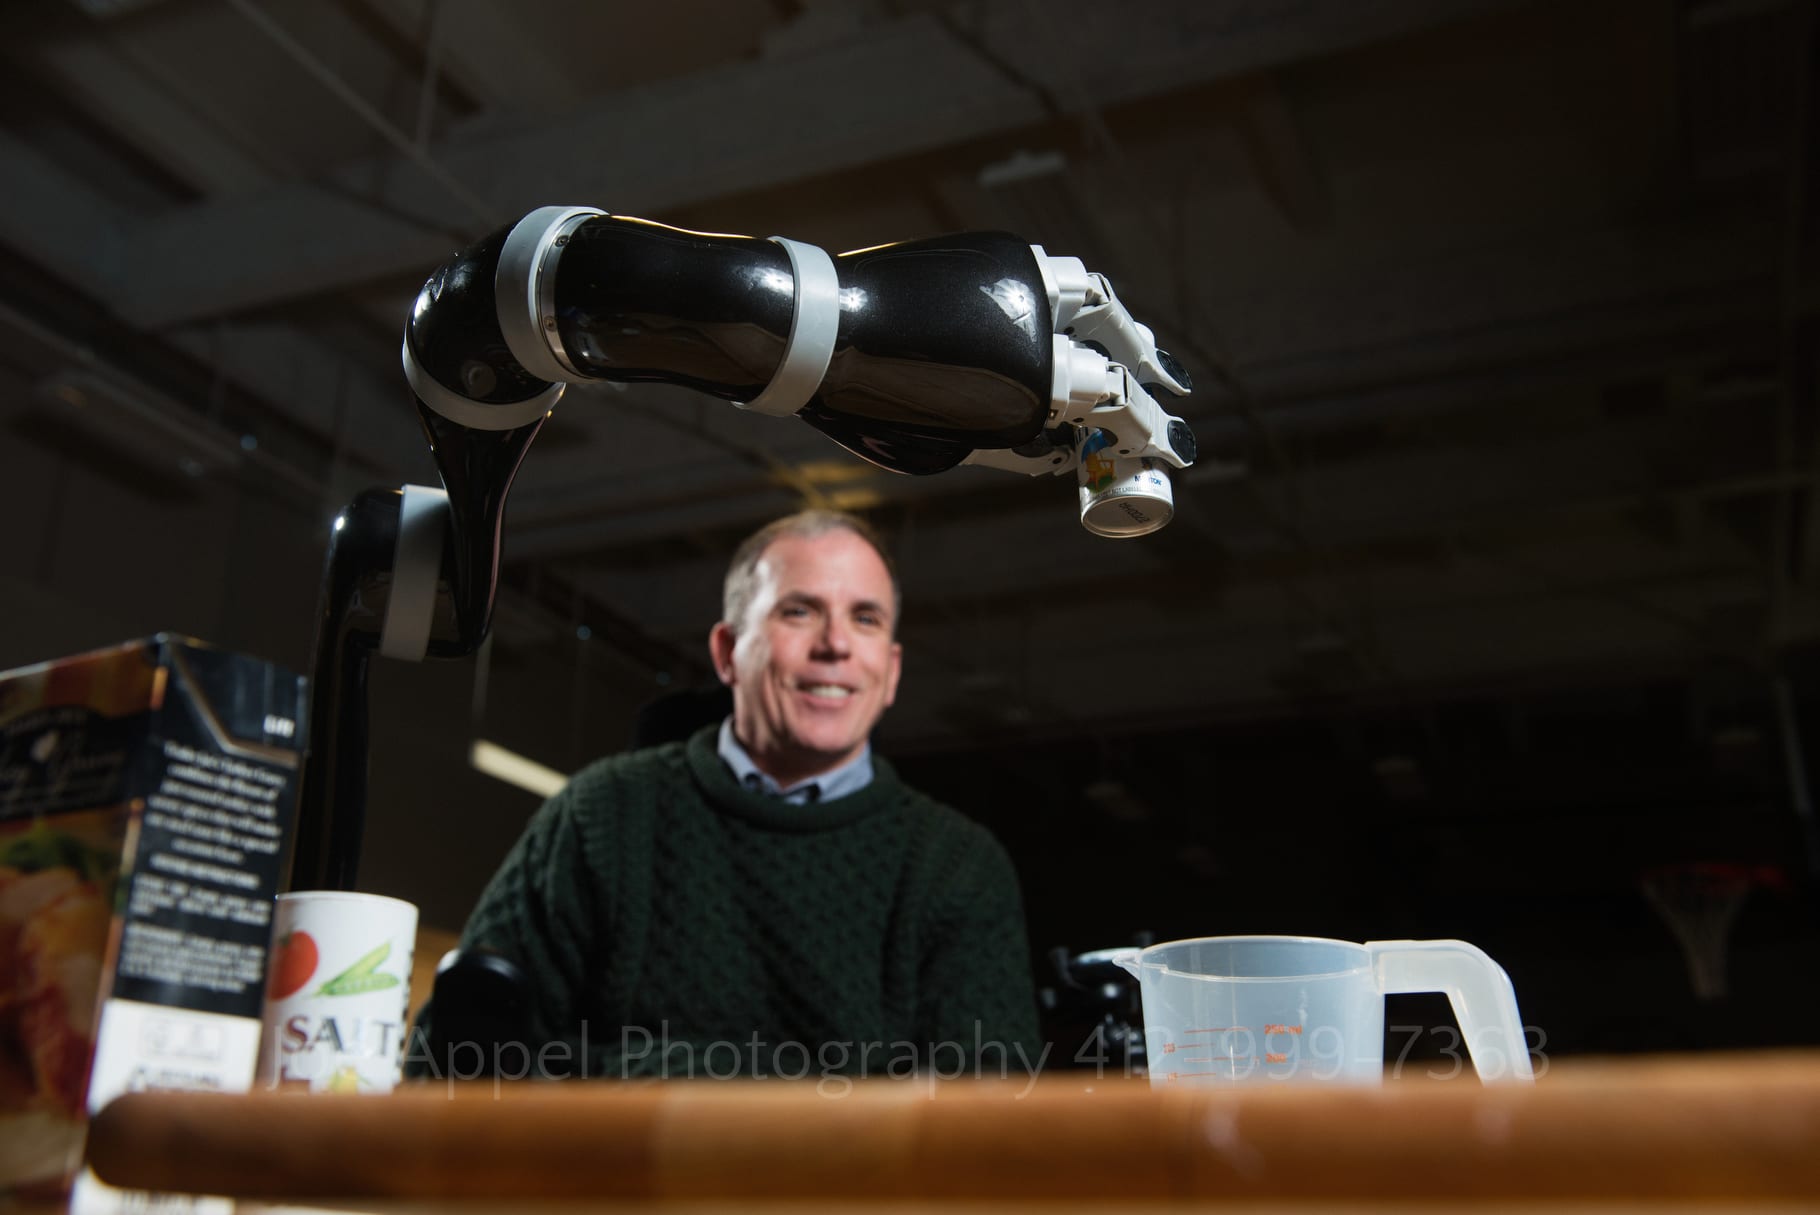 a man smiles as he manipulates a robotic arm to pour salt into a measuring cup by Pittsburgh Editorial Photographers Joe Appel Photography.